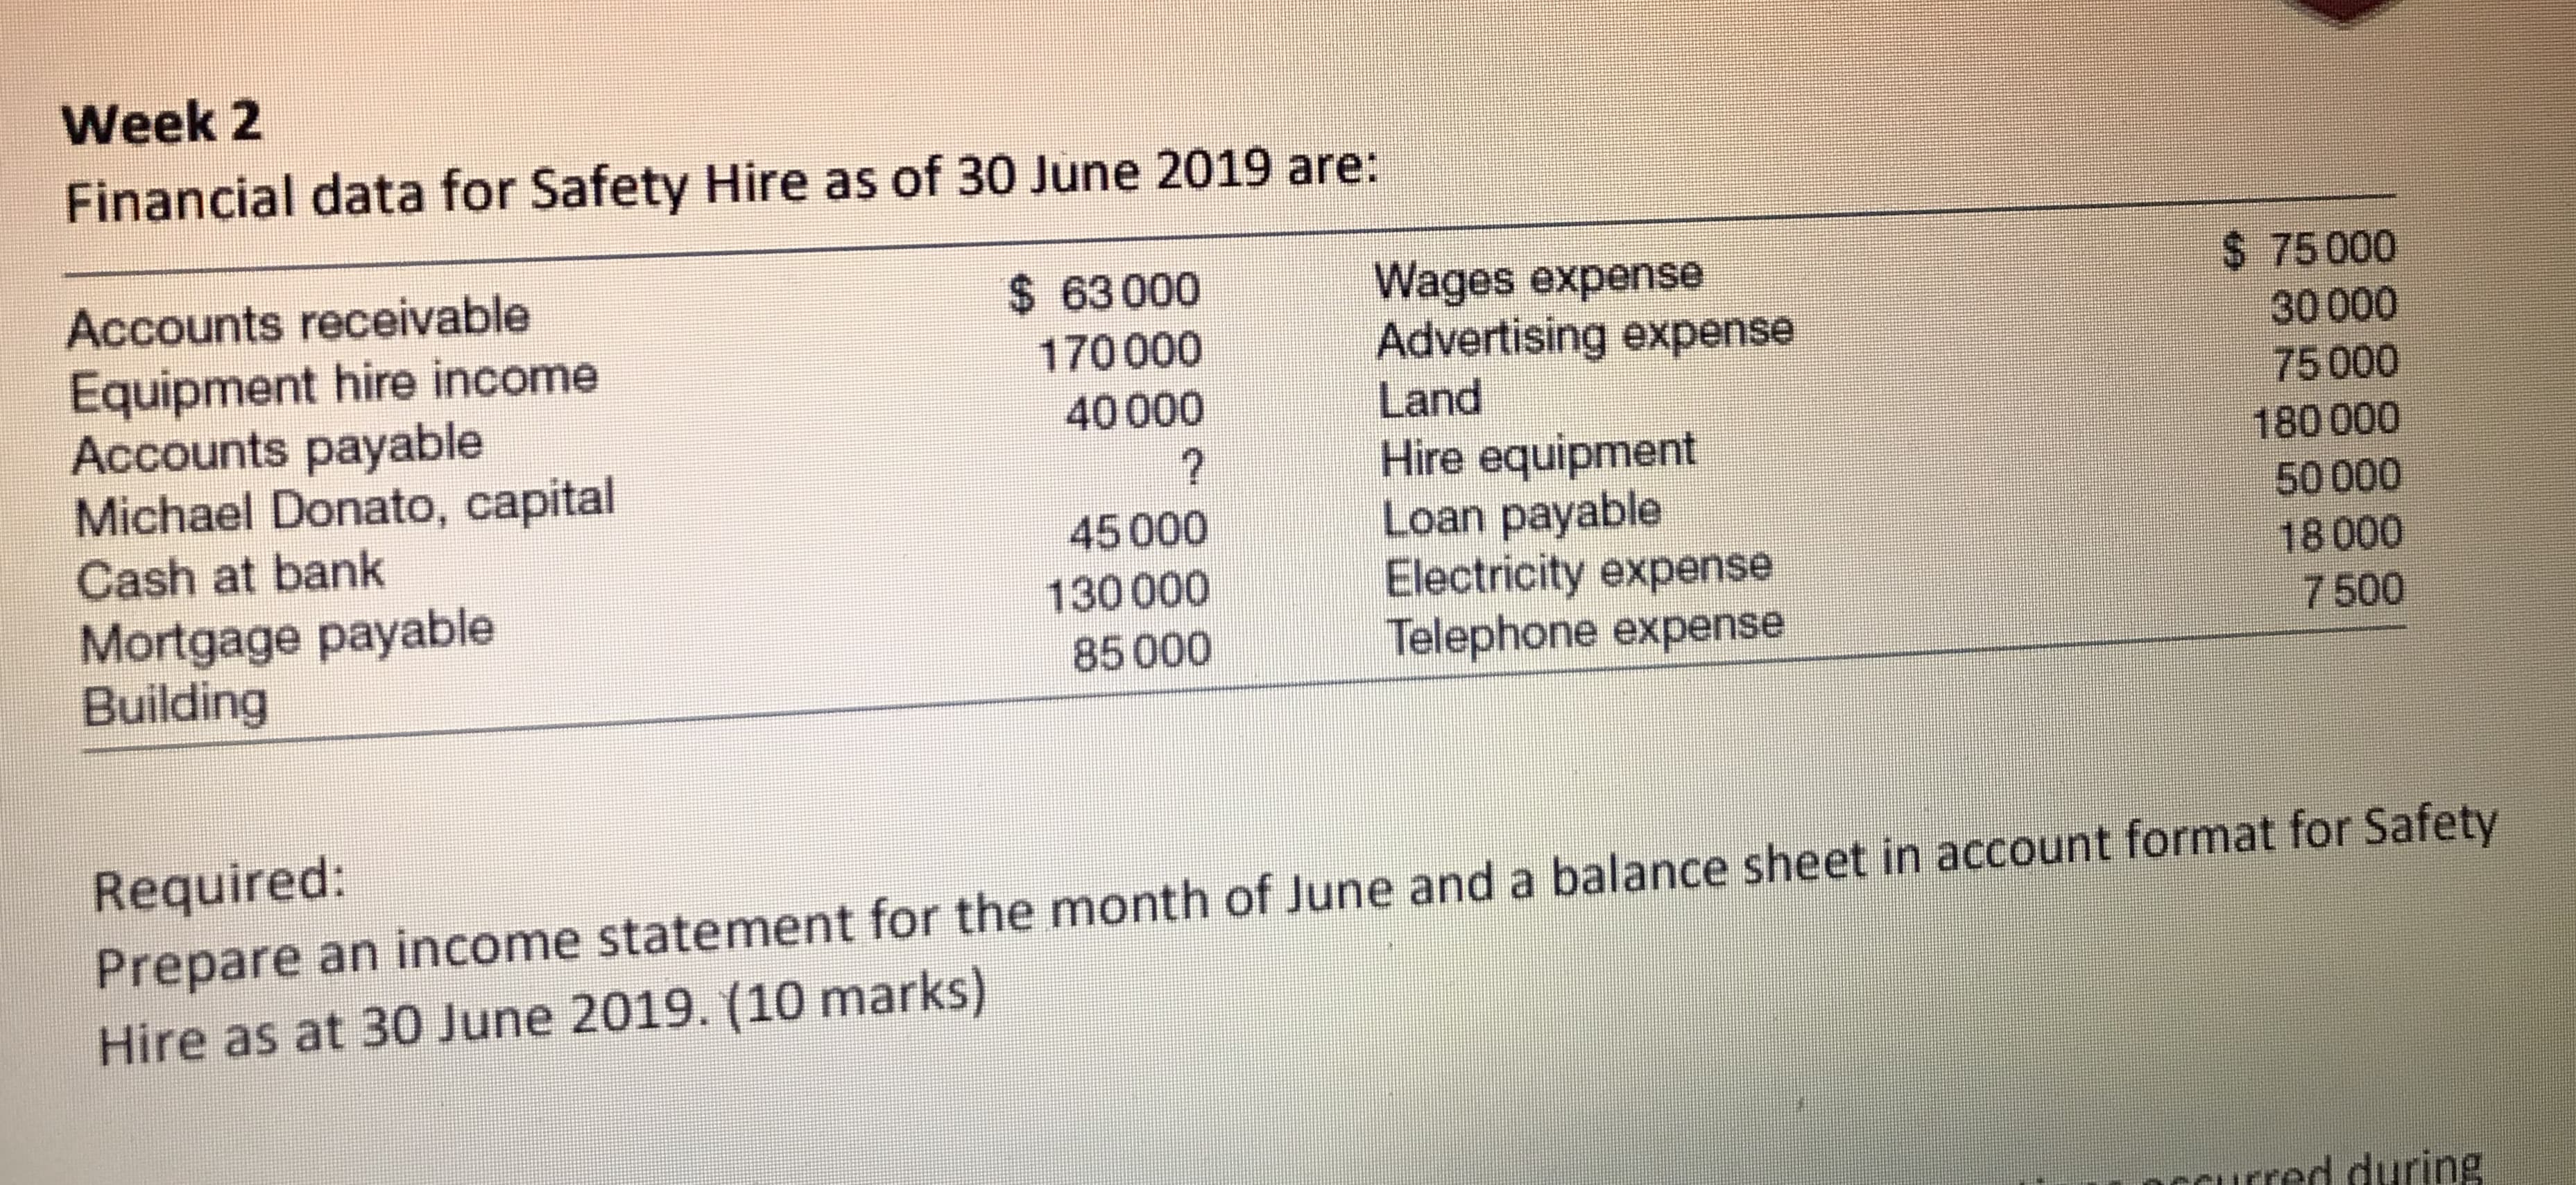 Required:
Prepare an income statement for the month of June and a balance sheet in account format for Safety
Hire as at 30 June 2019. (10 marks)
